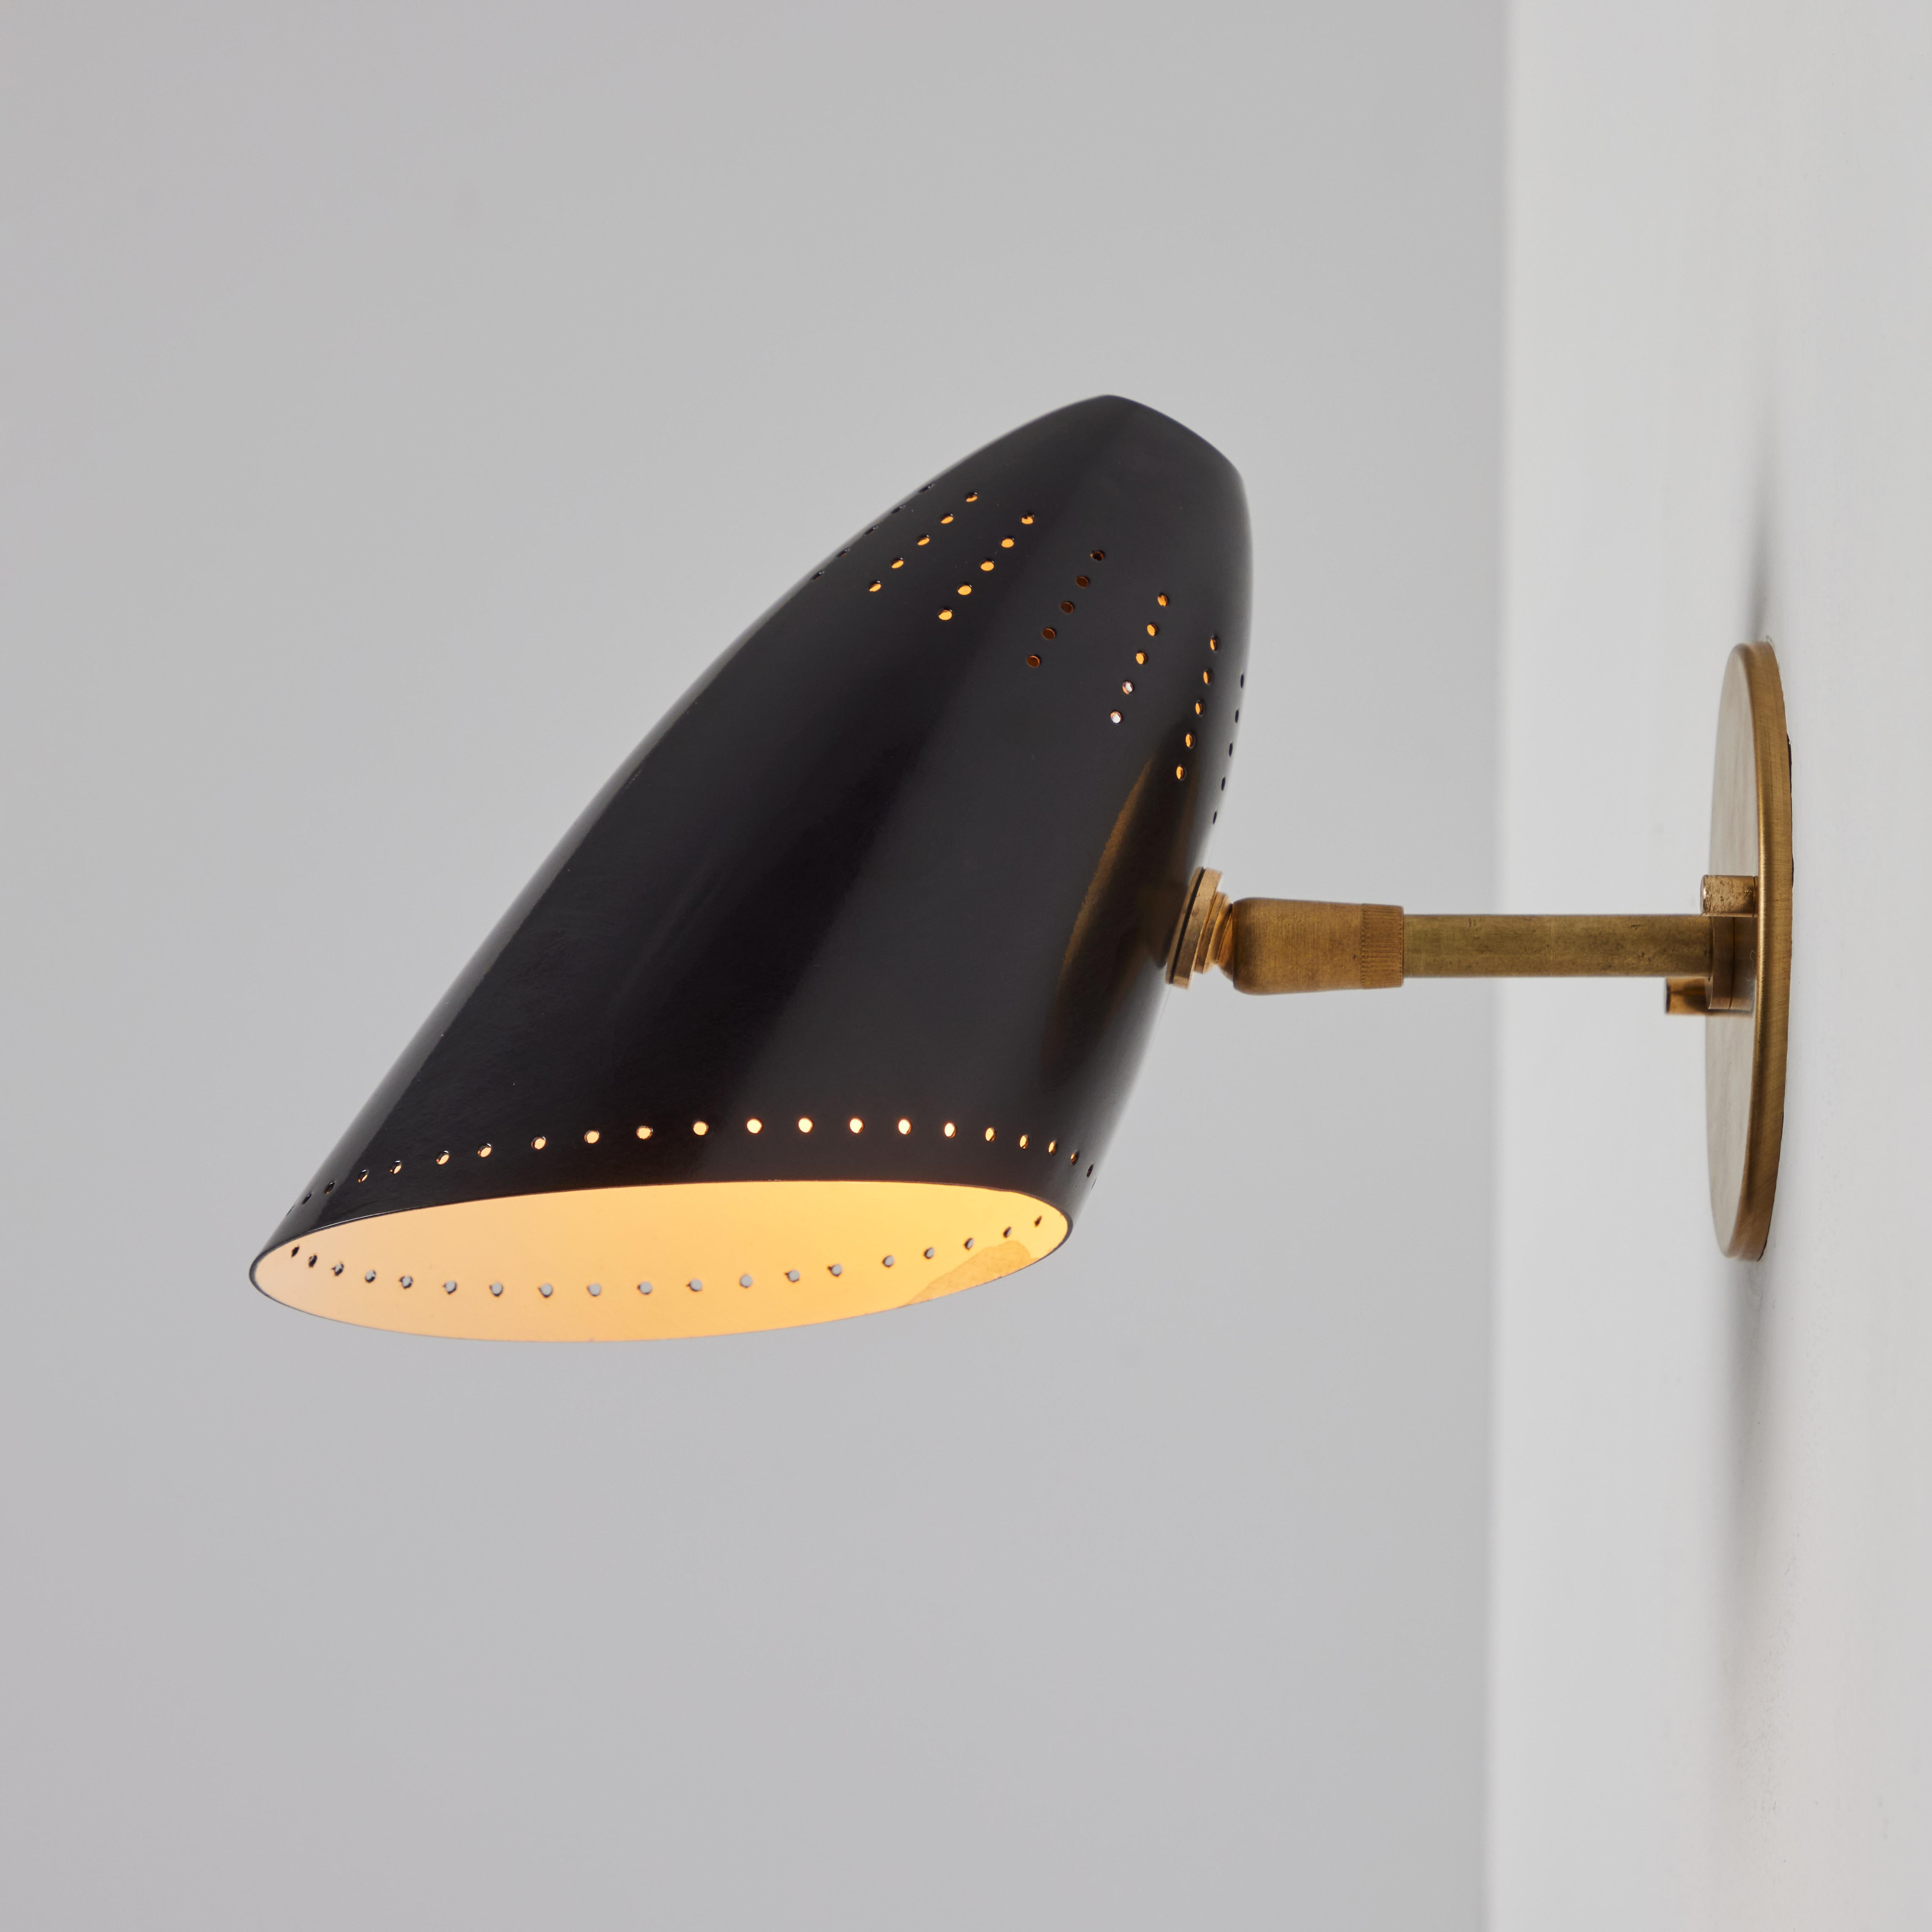 Pair of 1950s Black Perforated Sconces Attributed to Jacques Biny. 

An exceptionally clean and simple design executed in perforated black metal shade with custom period-style brass backplate added for mounting over standard US j-box. The shade